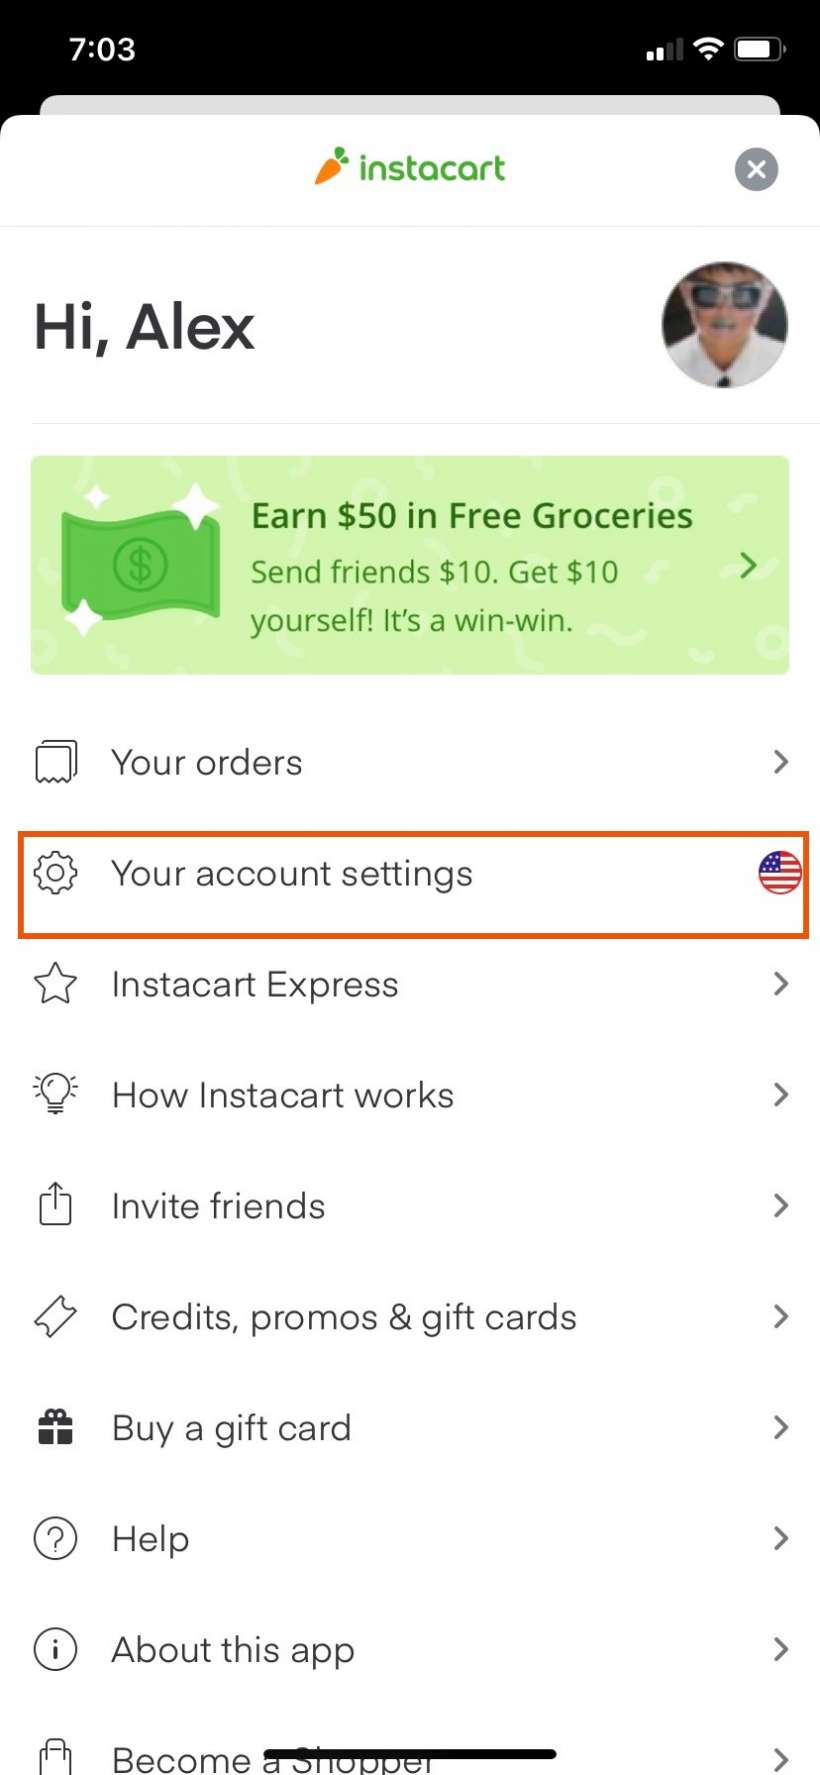 Can I use my EBT/food stamps card on Instacart? | The iPhone FAQ